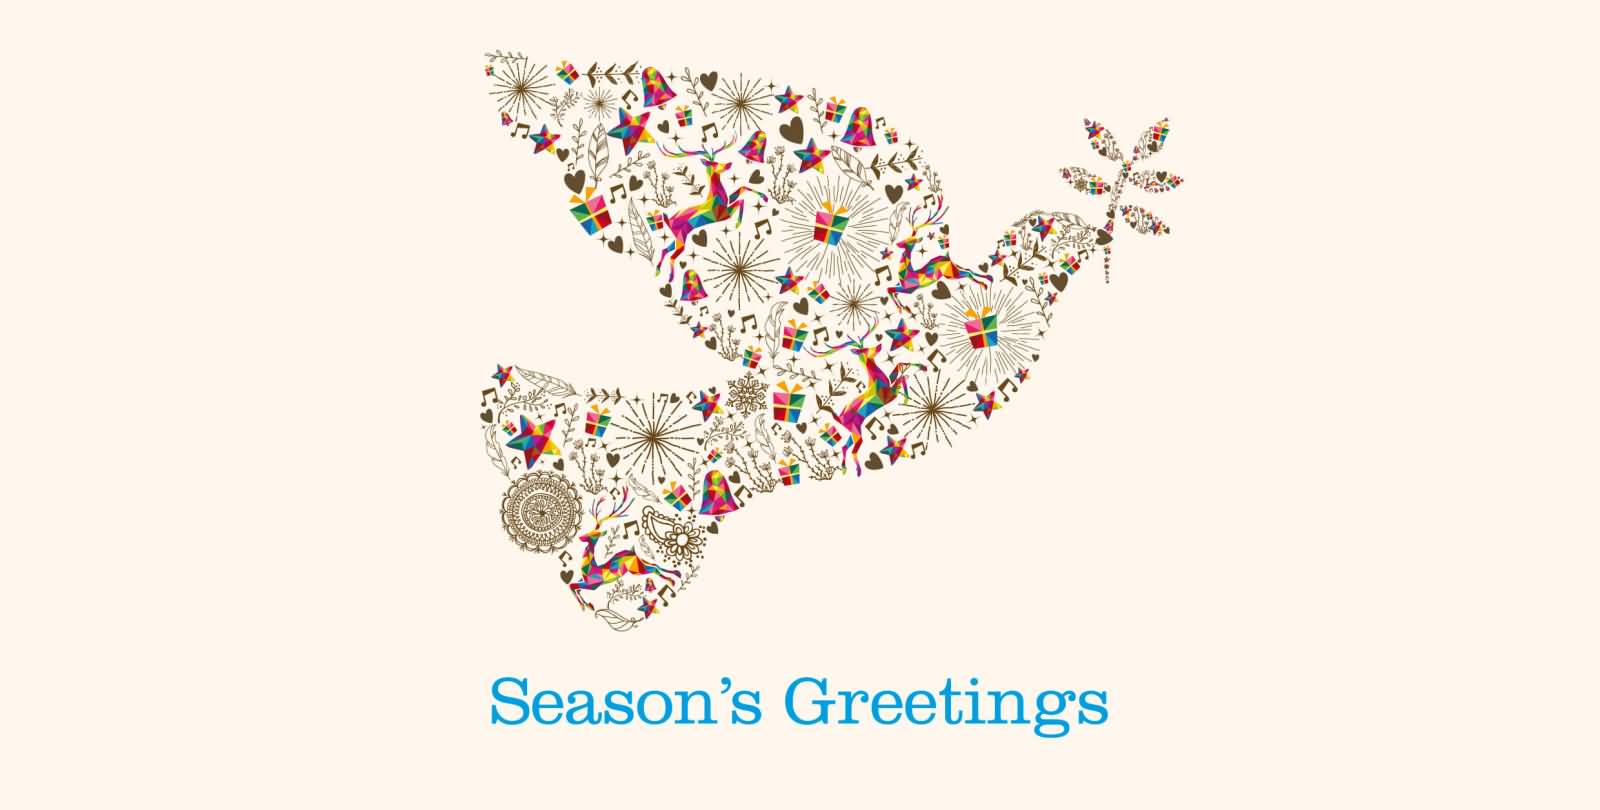 Season’s Greetings Flying Dove With Olive Branch In Mouth